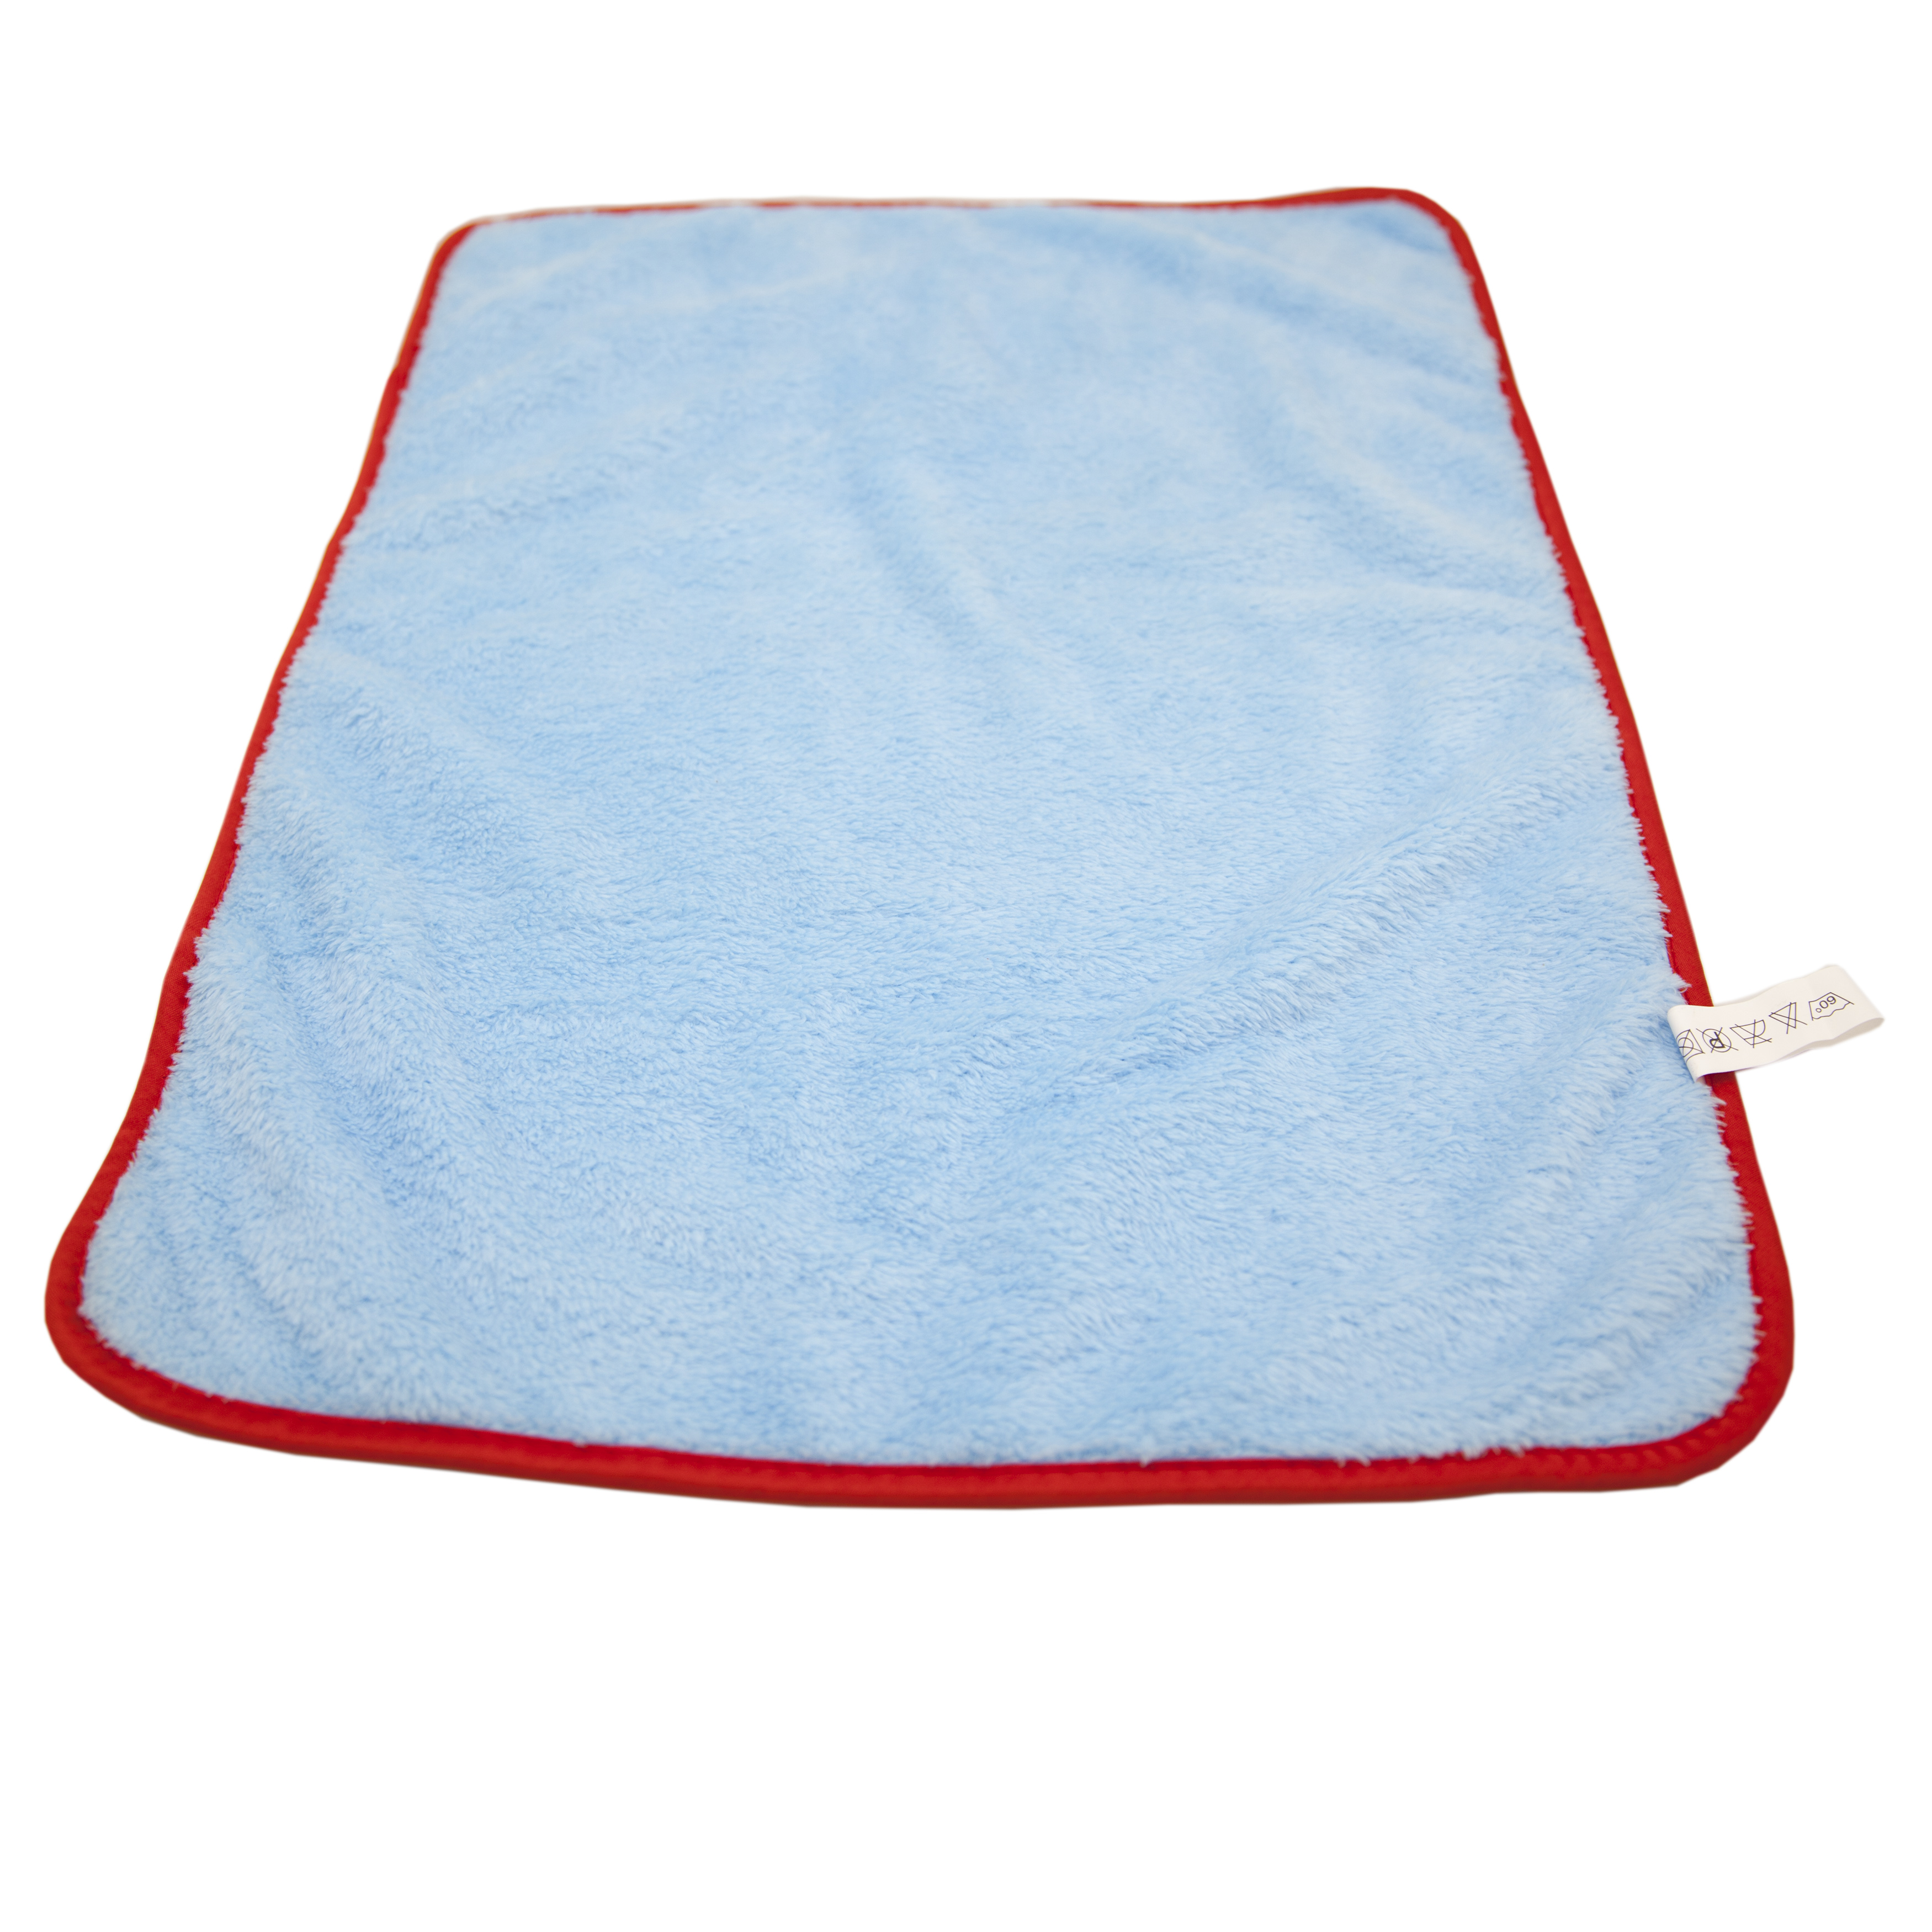 Microfiber Coral velvet Cleaning Cloth